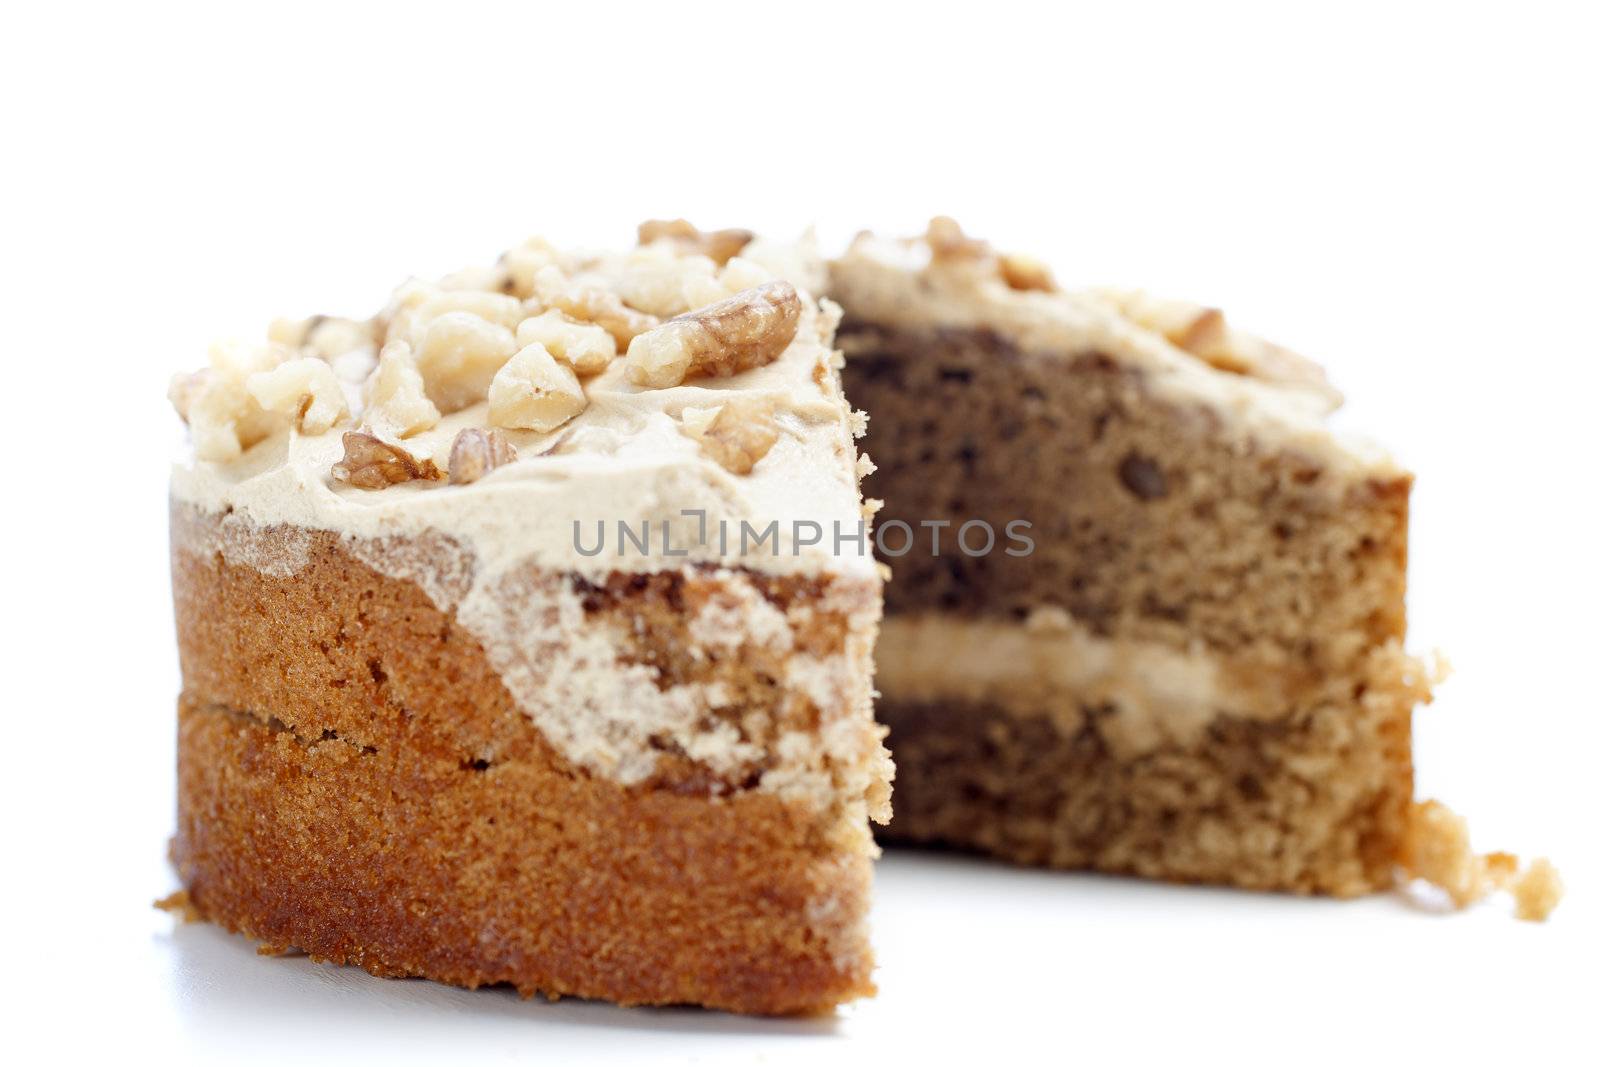 Sliced coffee cake ready for serving